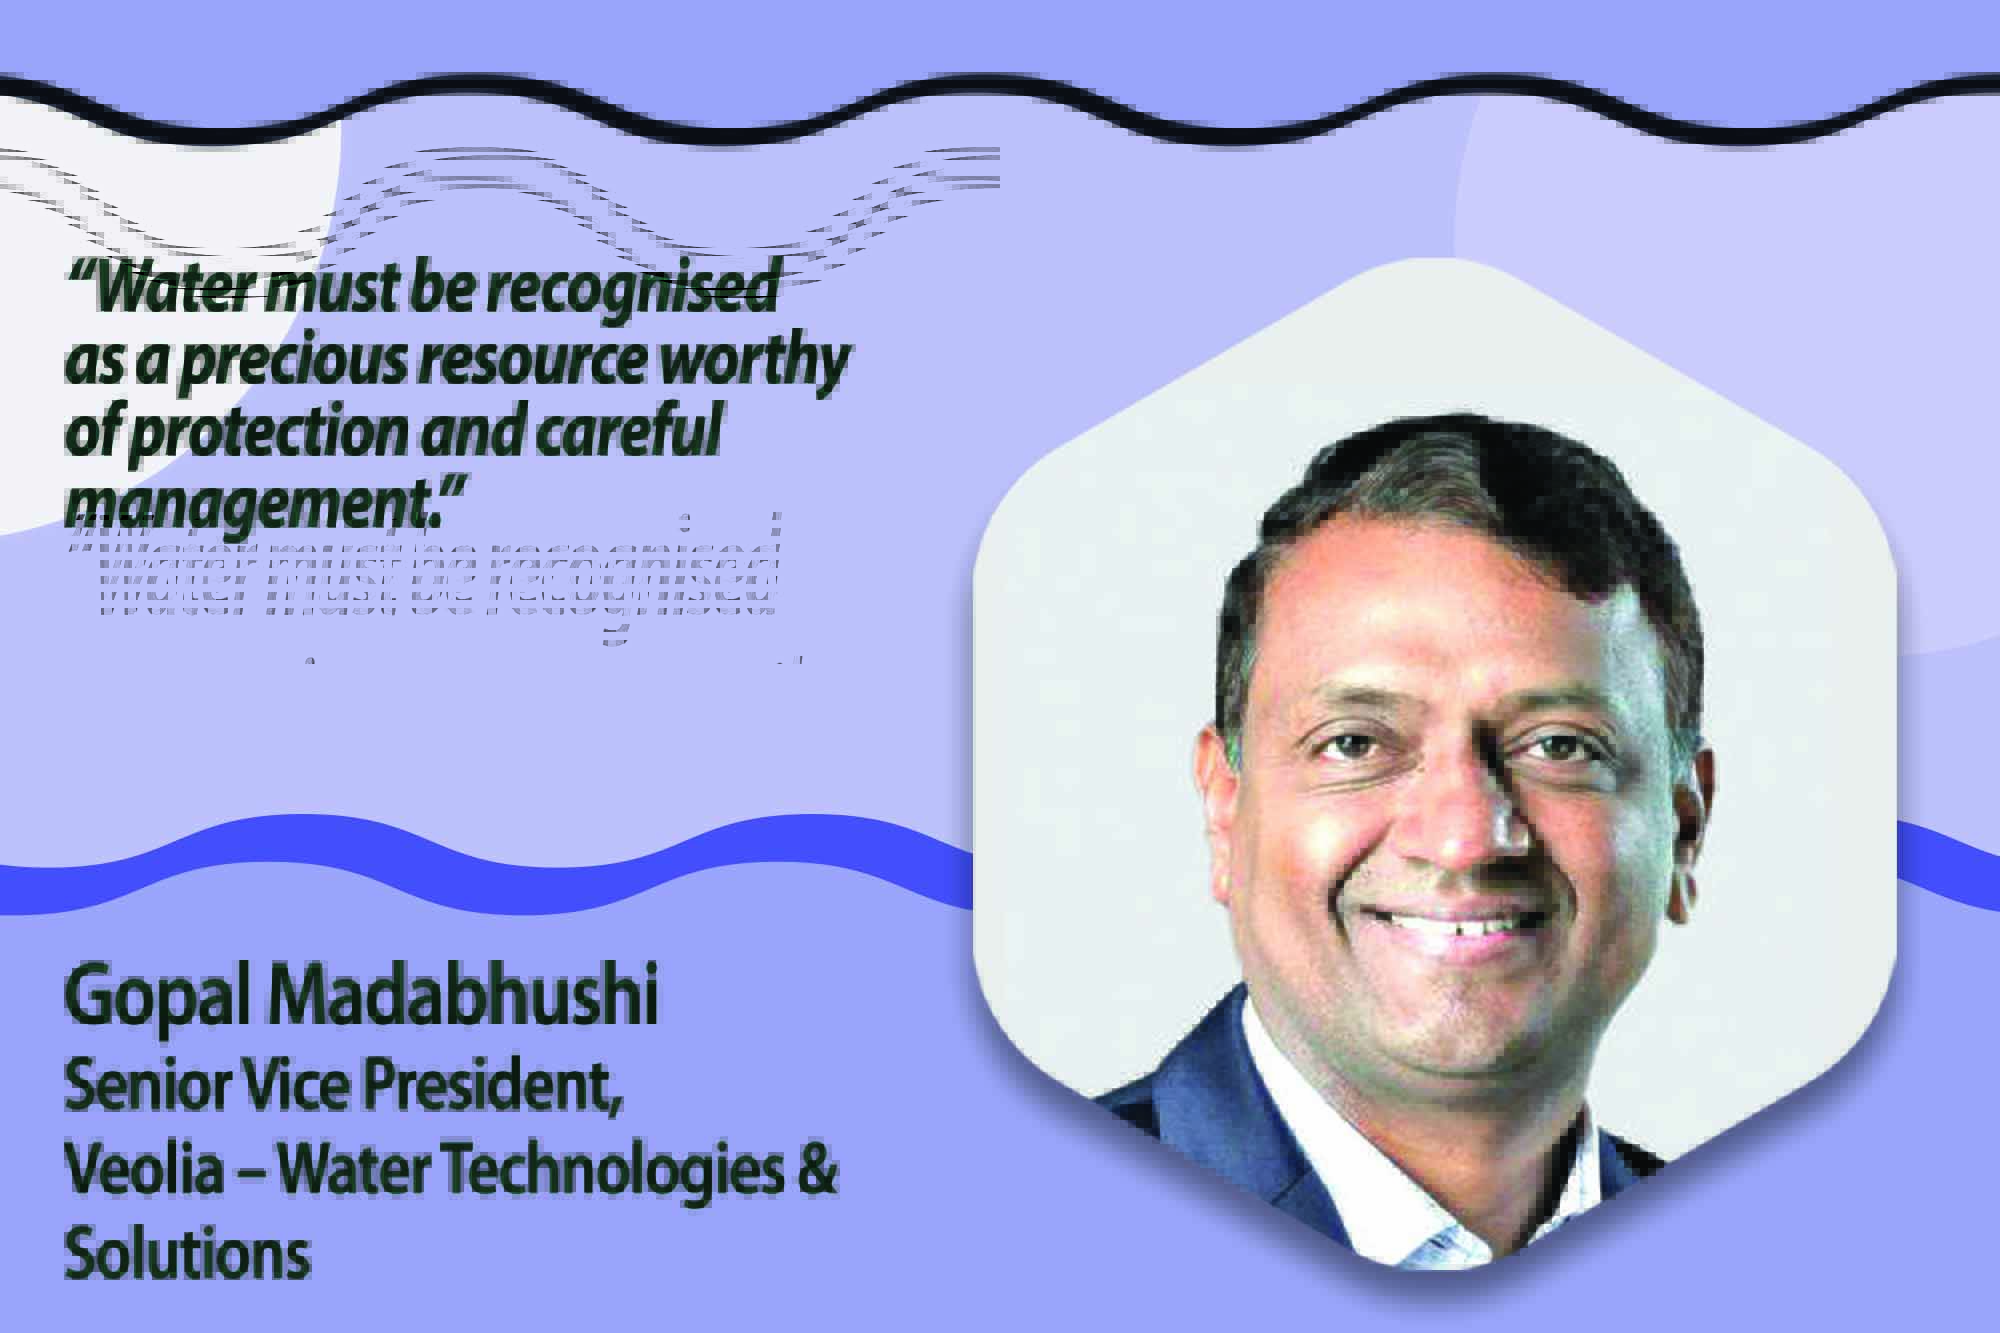 India's water industry is critical due to scarcity, pollution, and inefficient management. In this exclusive interview with Gopalakrishna Madabhushi, Senior Vice President and Business Leader for South Asia at Veolia